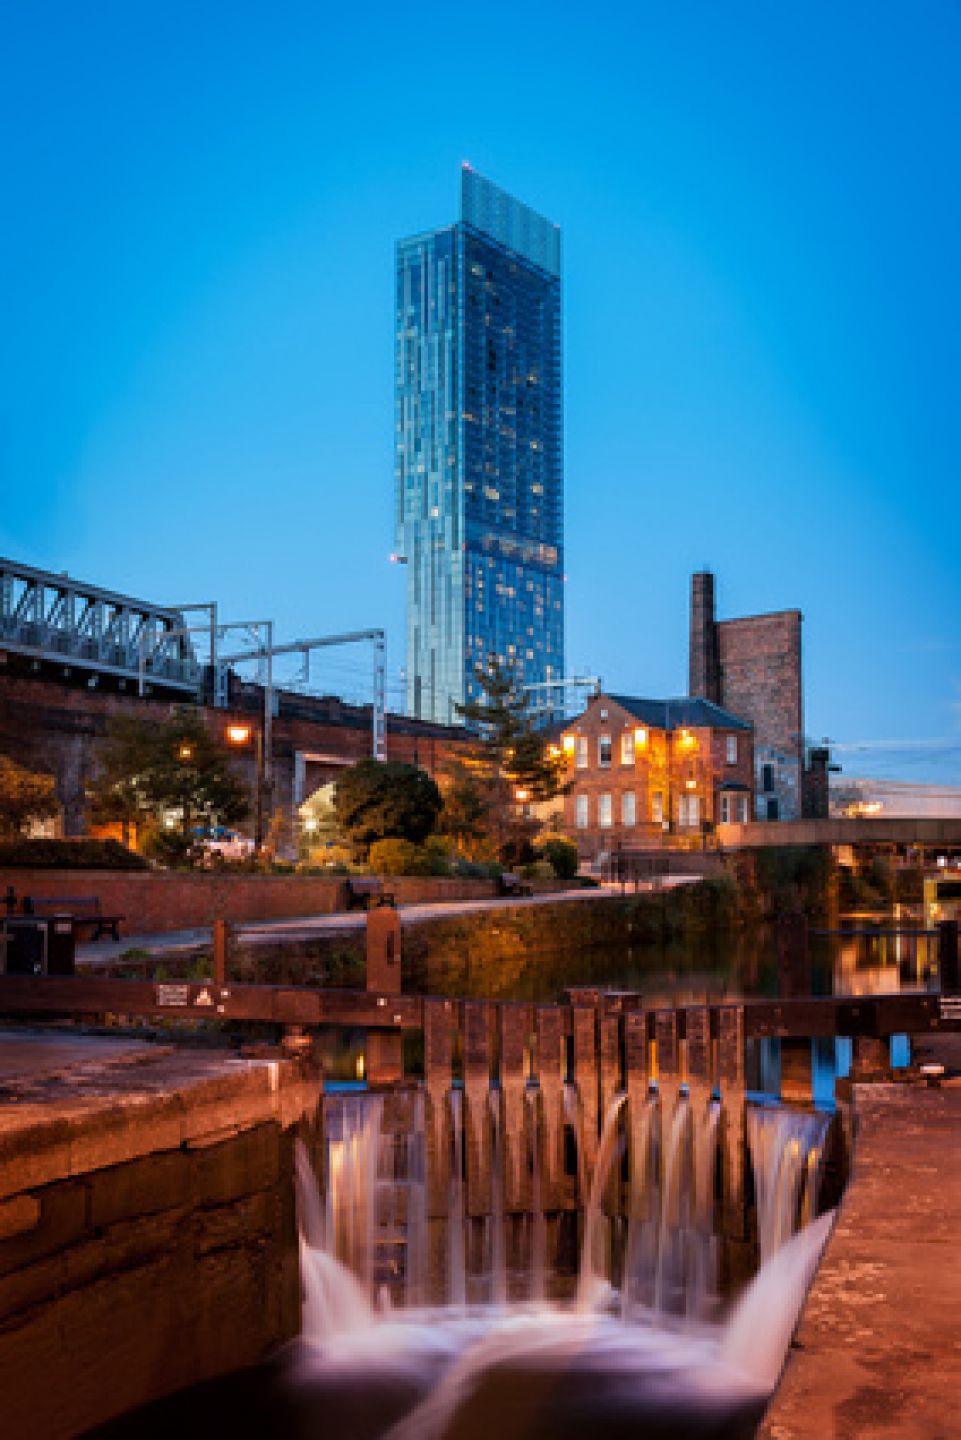 Manchester Beetham Tower